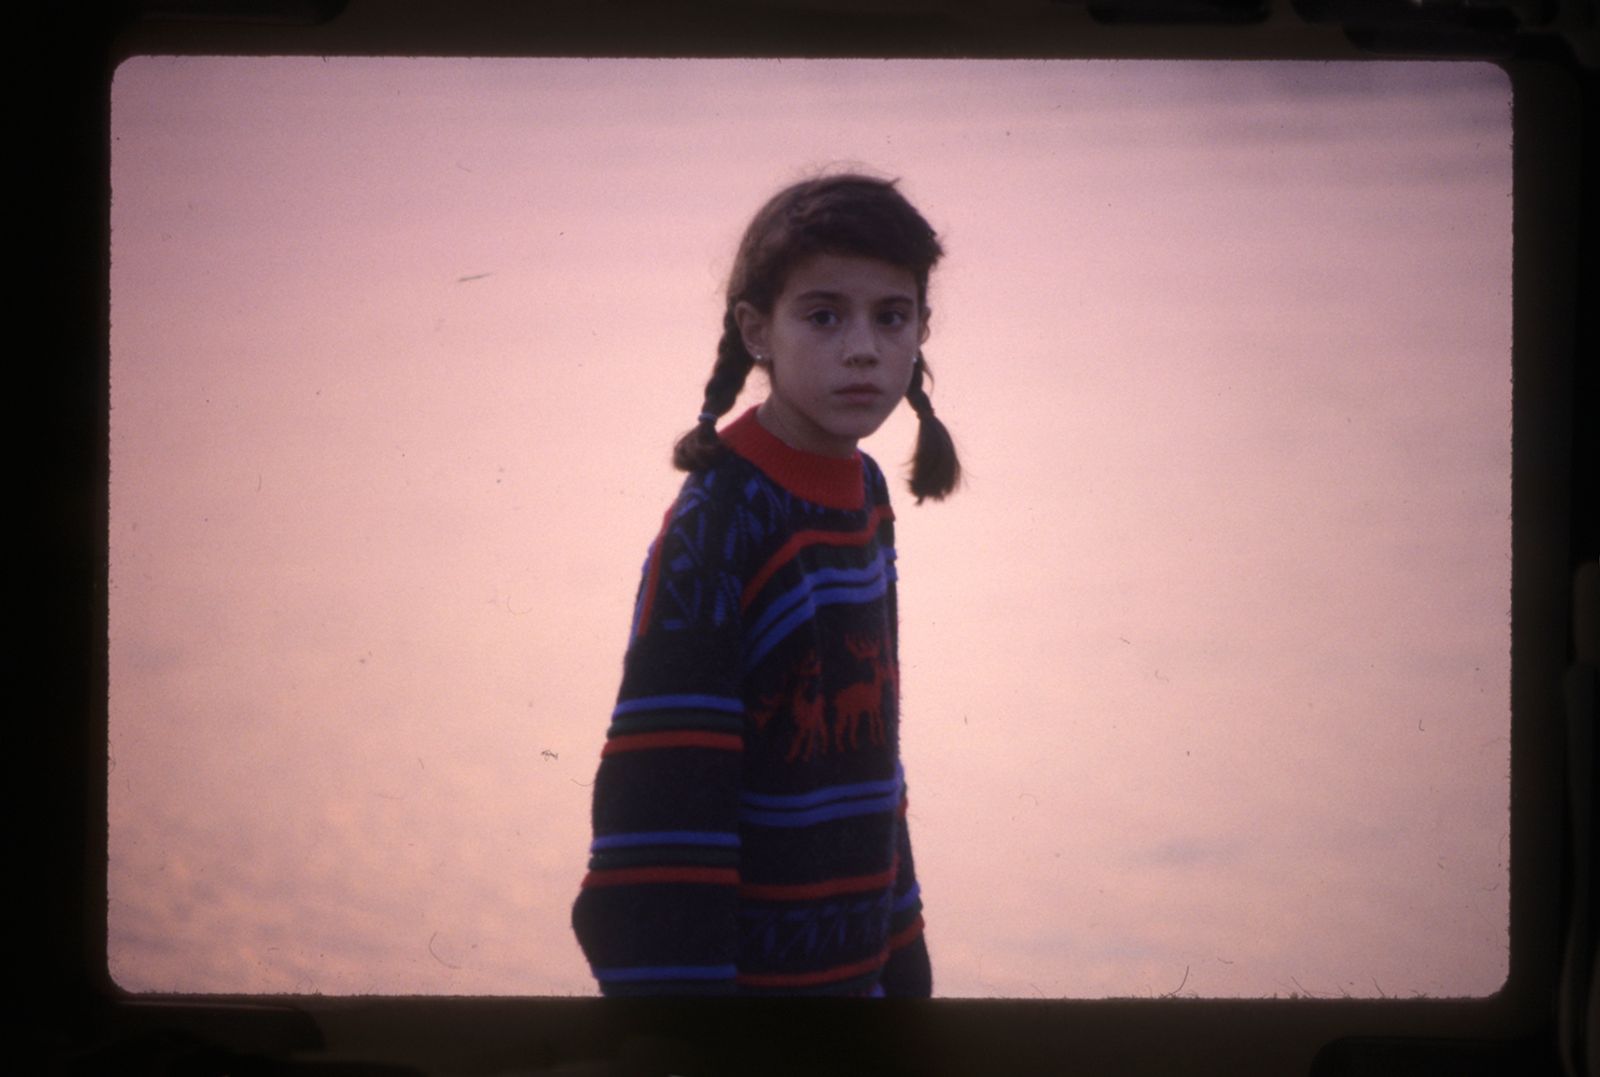 © Alice Proujansky - A childhood photograph of me taken by my mother, rephotographed by me.